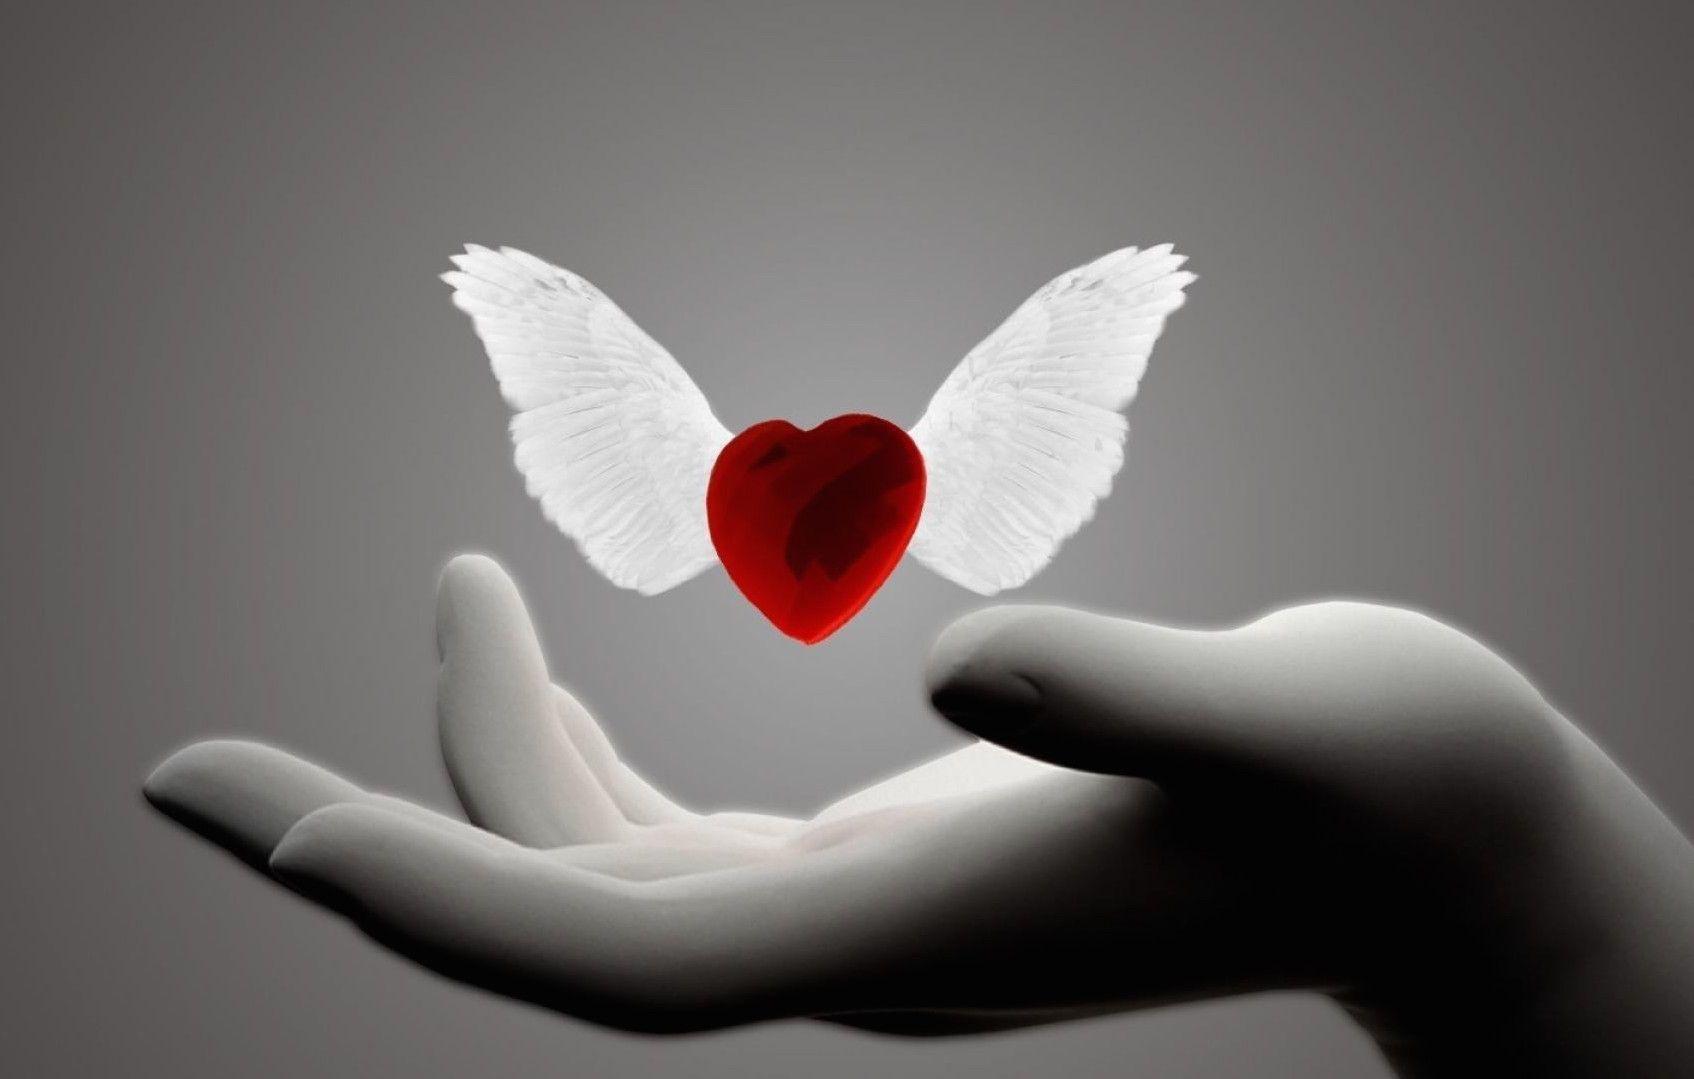 9867 Heart With Wings 1920×1080 Digital Art Wallpaper. The Humble I